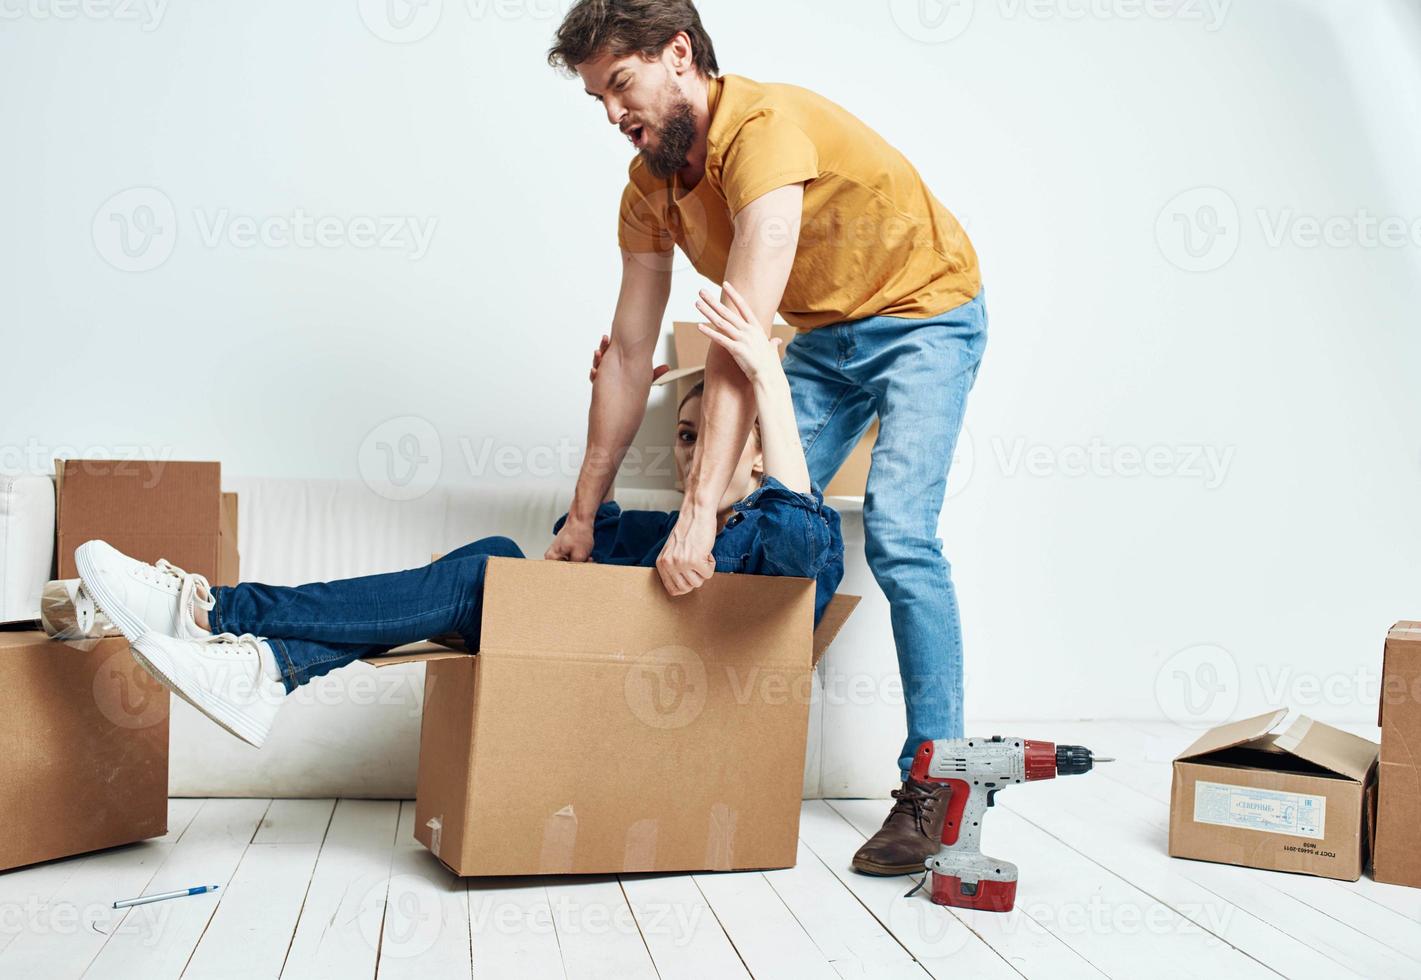 young married couple boxes with things moving room interior fun photo